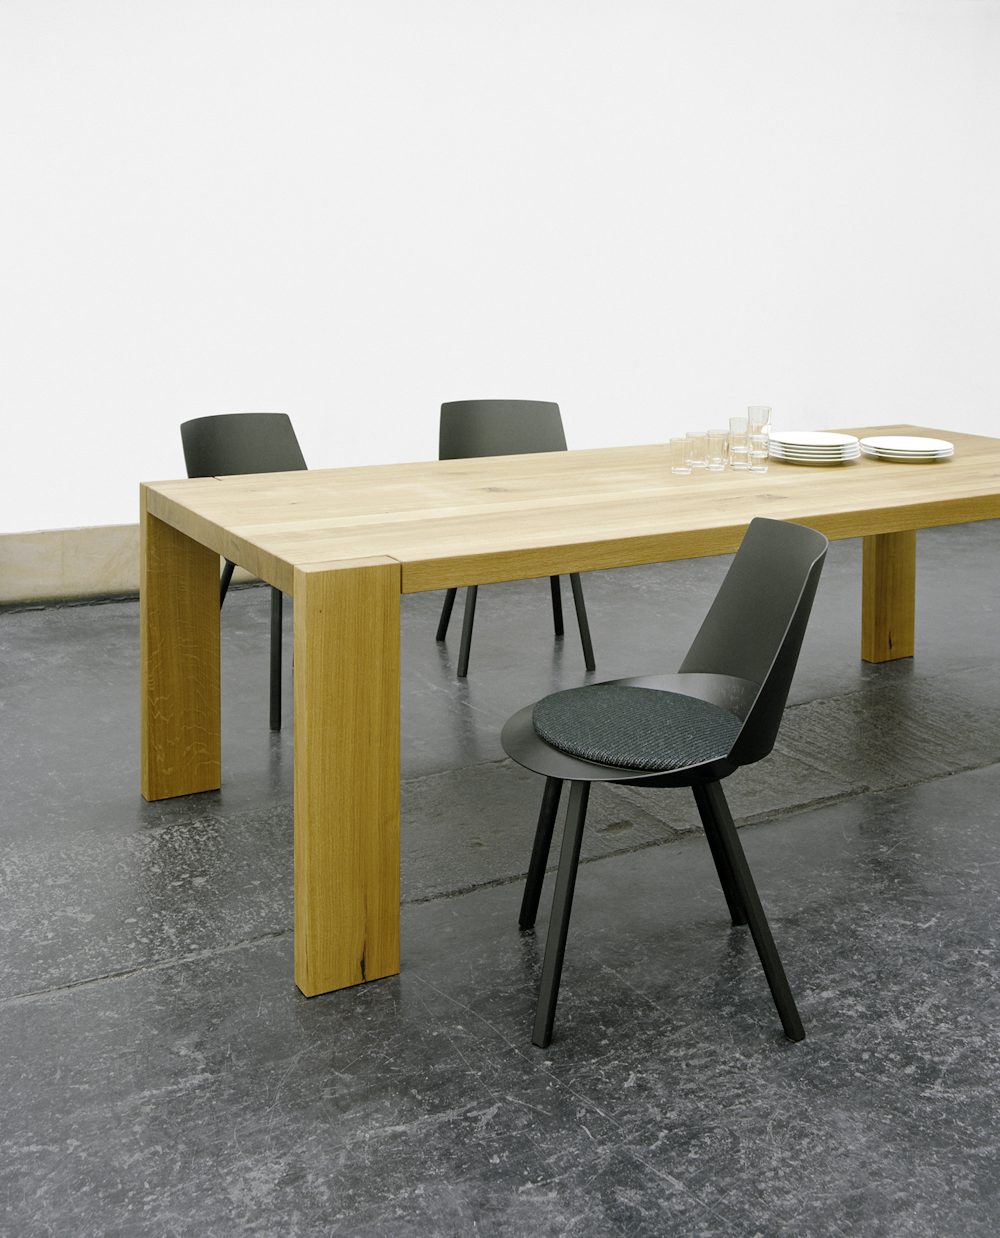 e15 london table with houdini side chairs in black